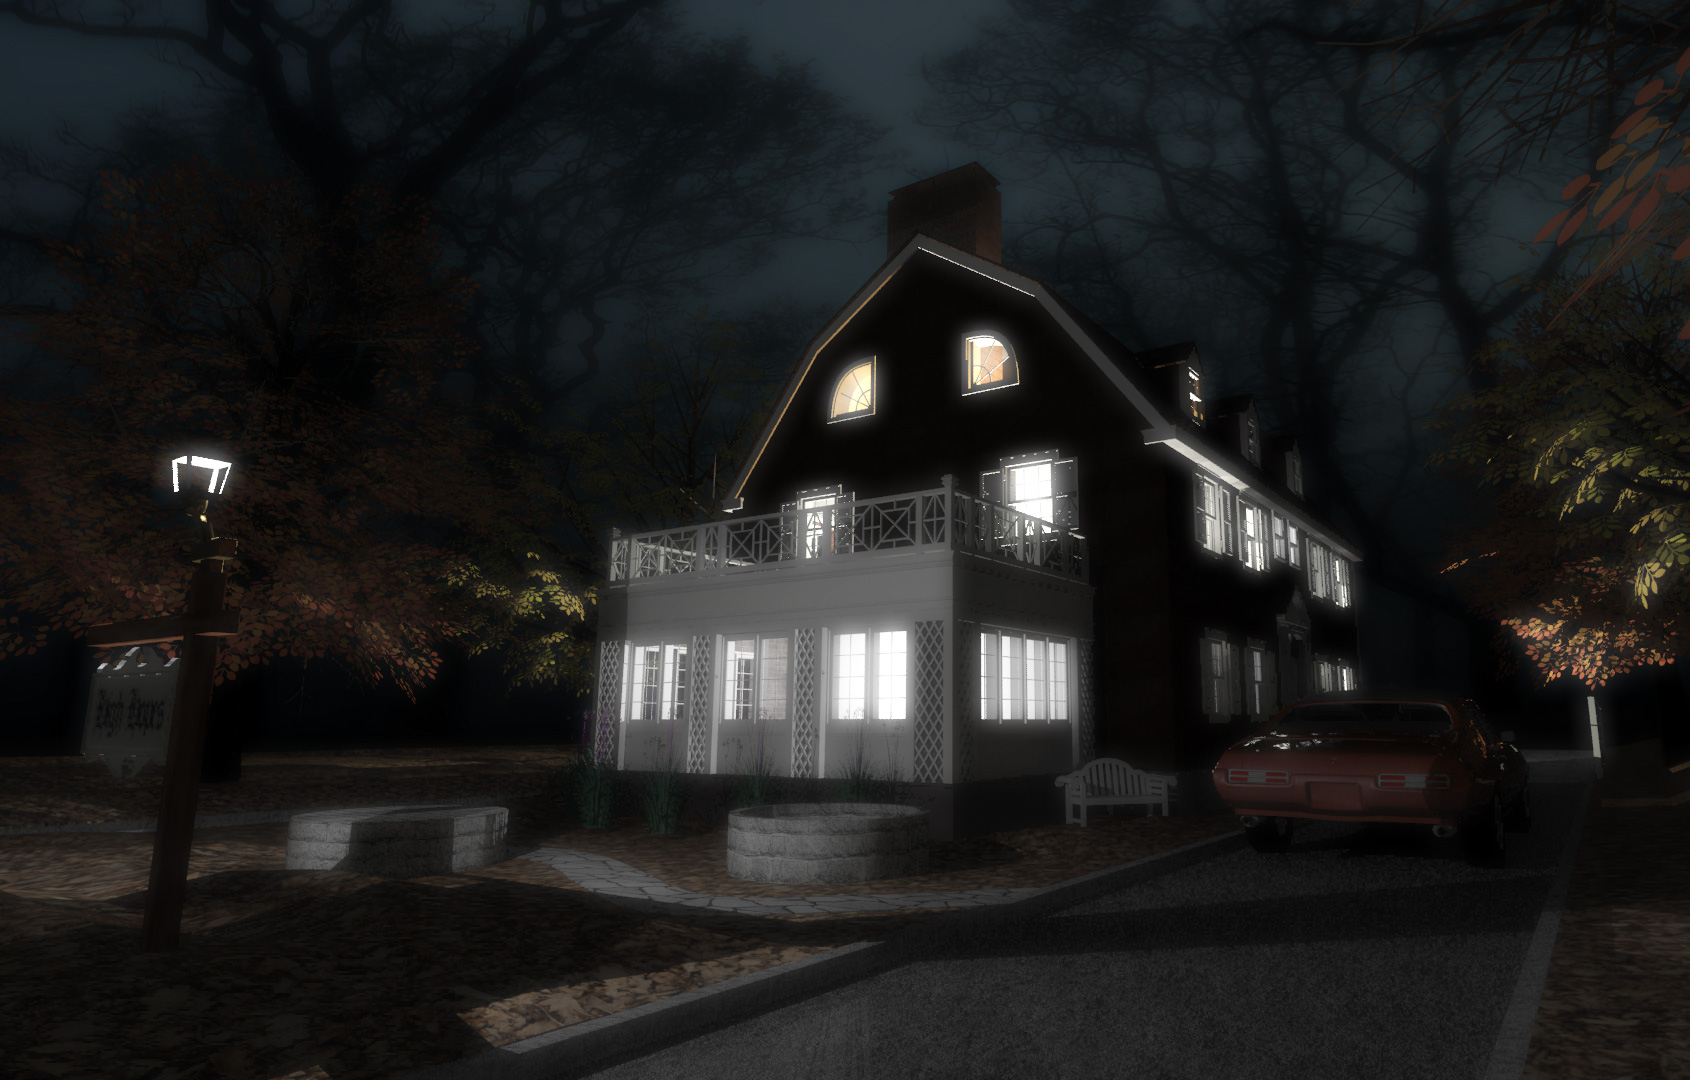 A 3D visualization of the infamous house in Ocean Avenue.